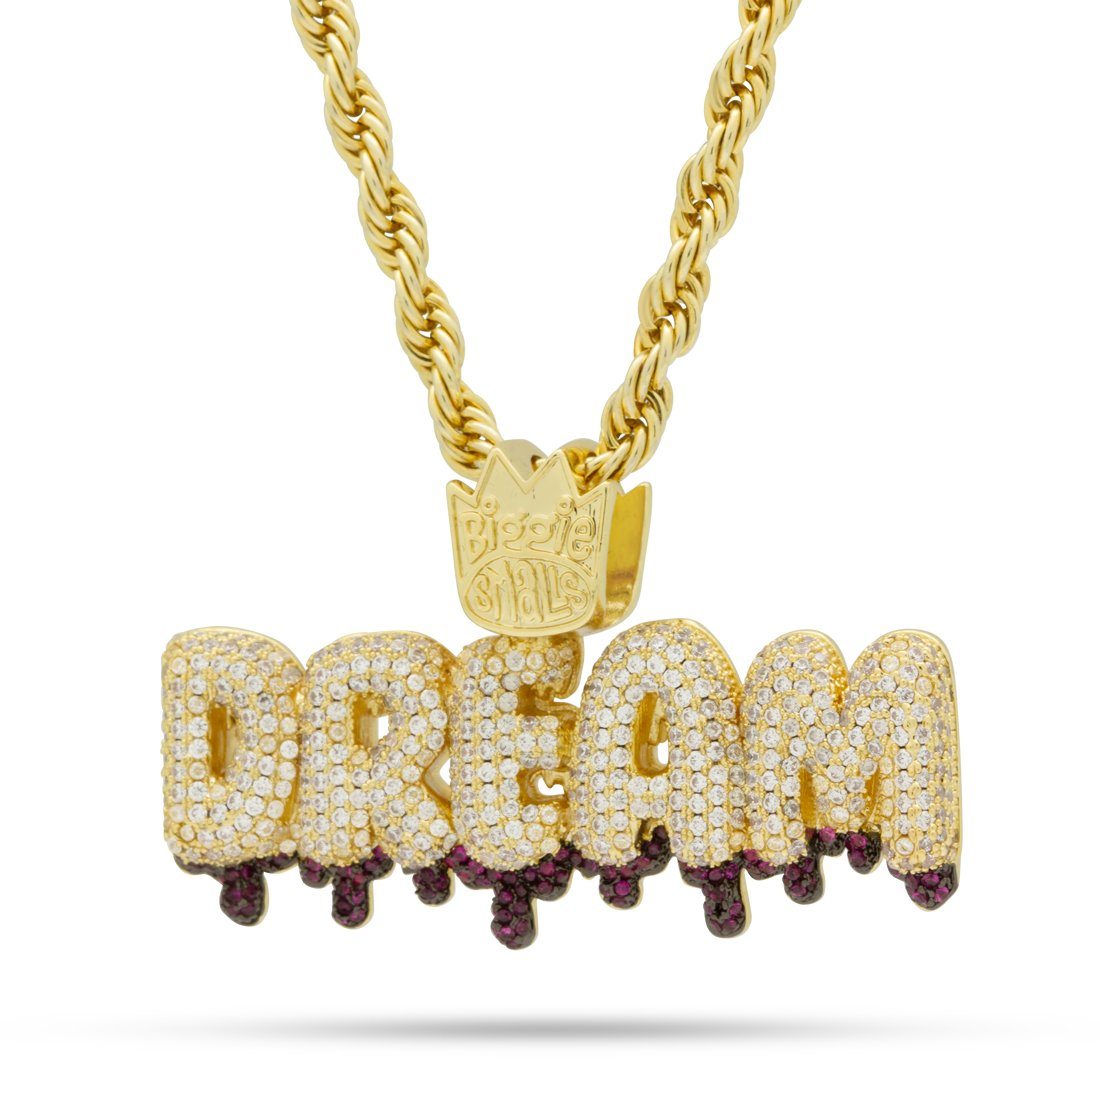 Notorious B.I.G. x King Ice - The Dream Necklace